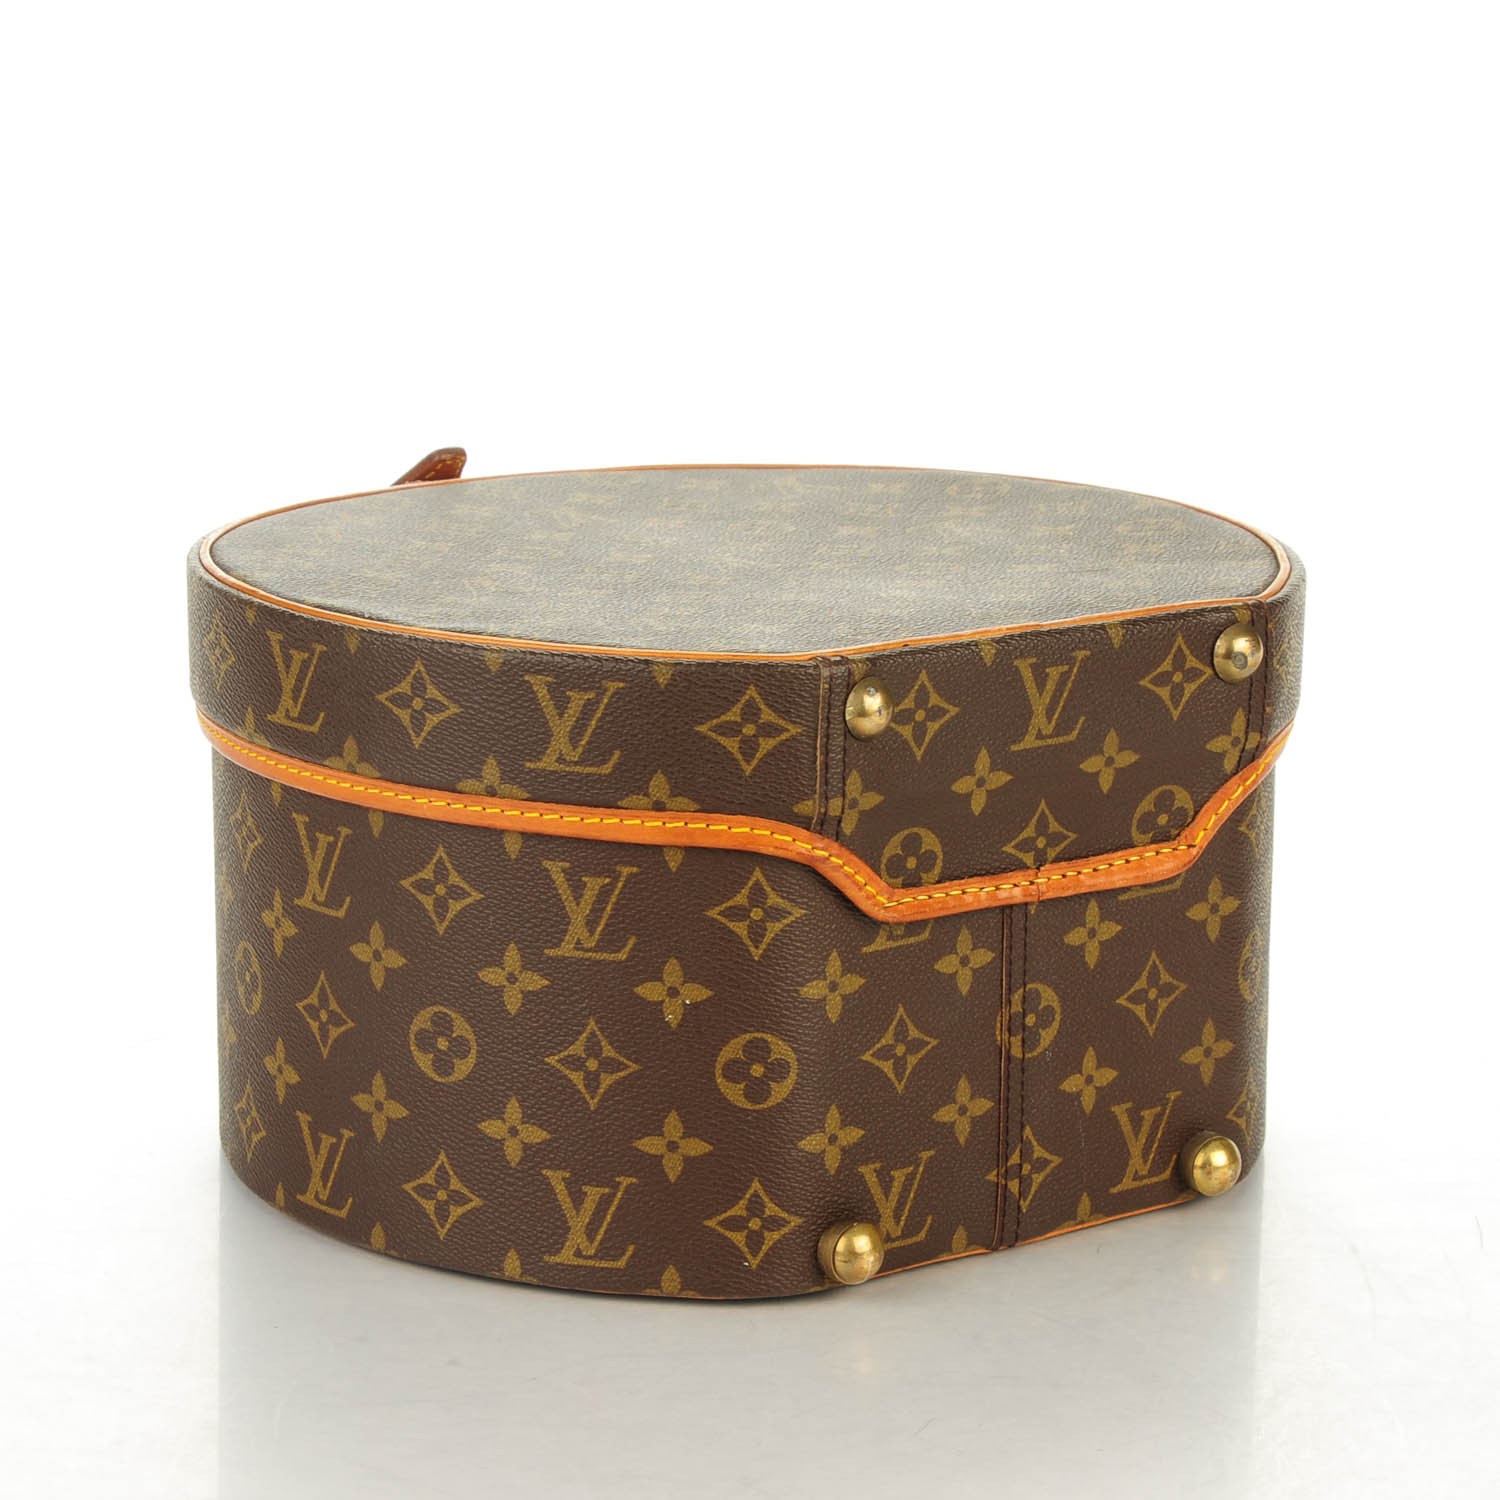 Louis Vuitton Hat And Scarf Yupoo Sellers